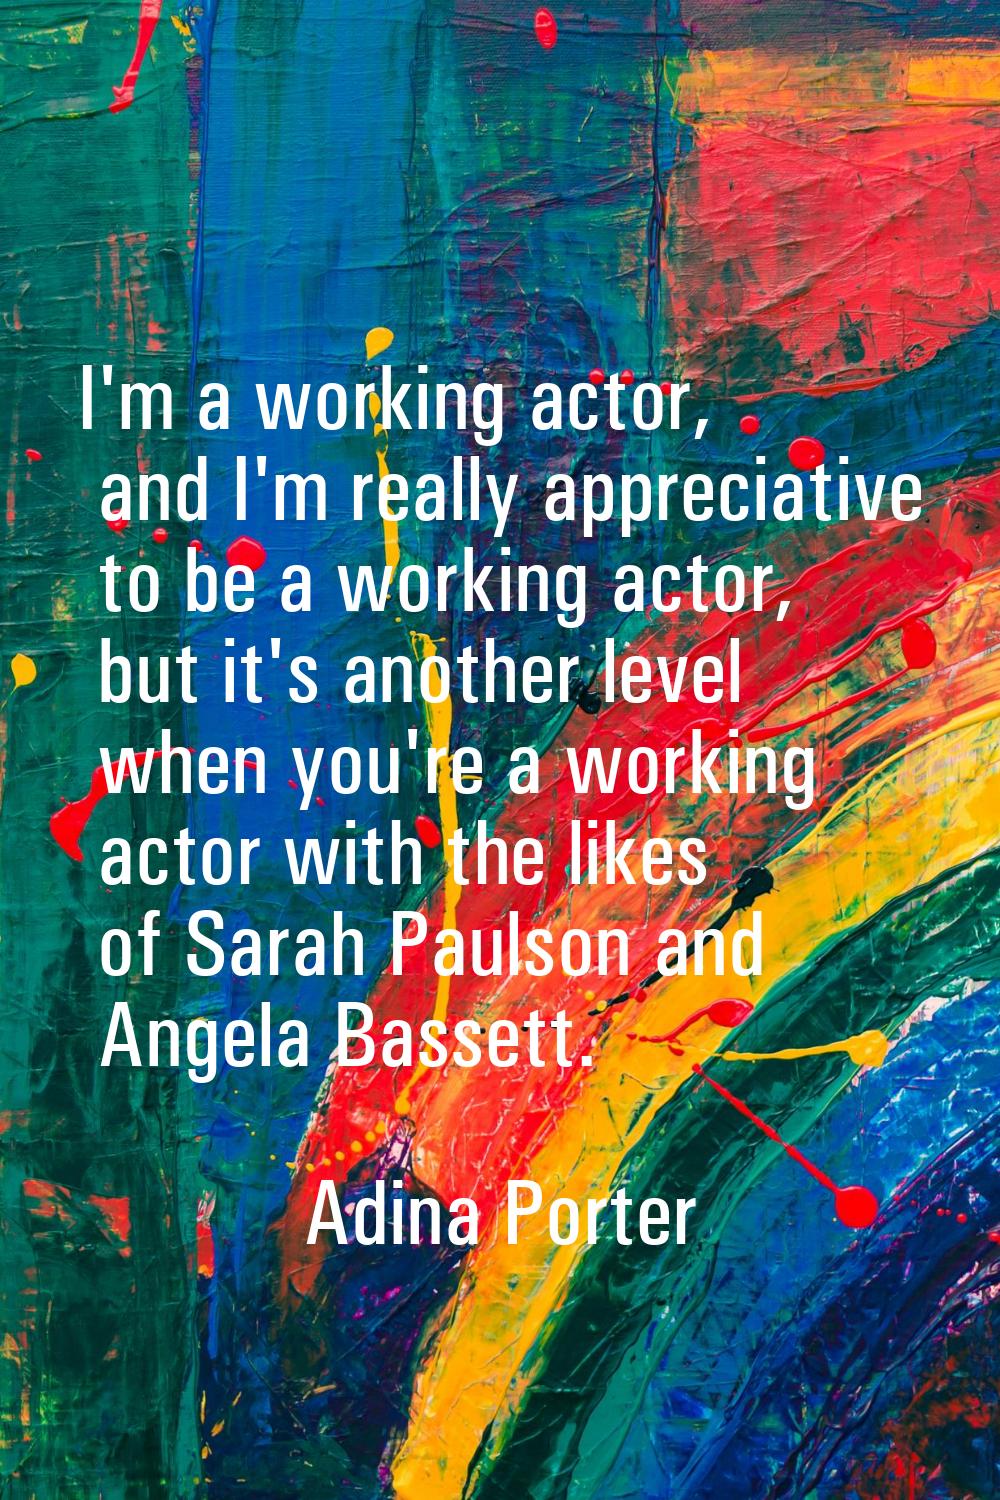 I'm a working actor, and I'm really appreciative to be a working actor, but it's another level when